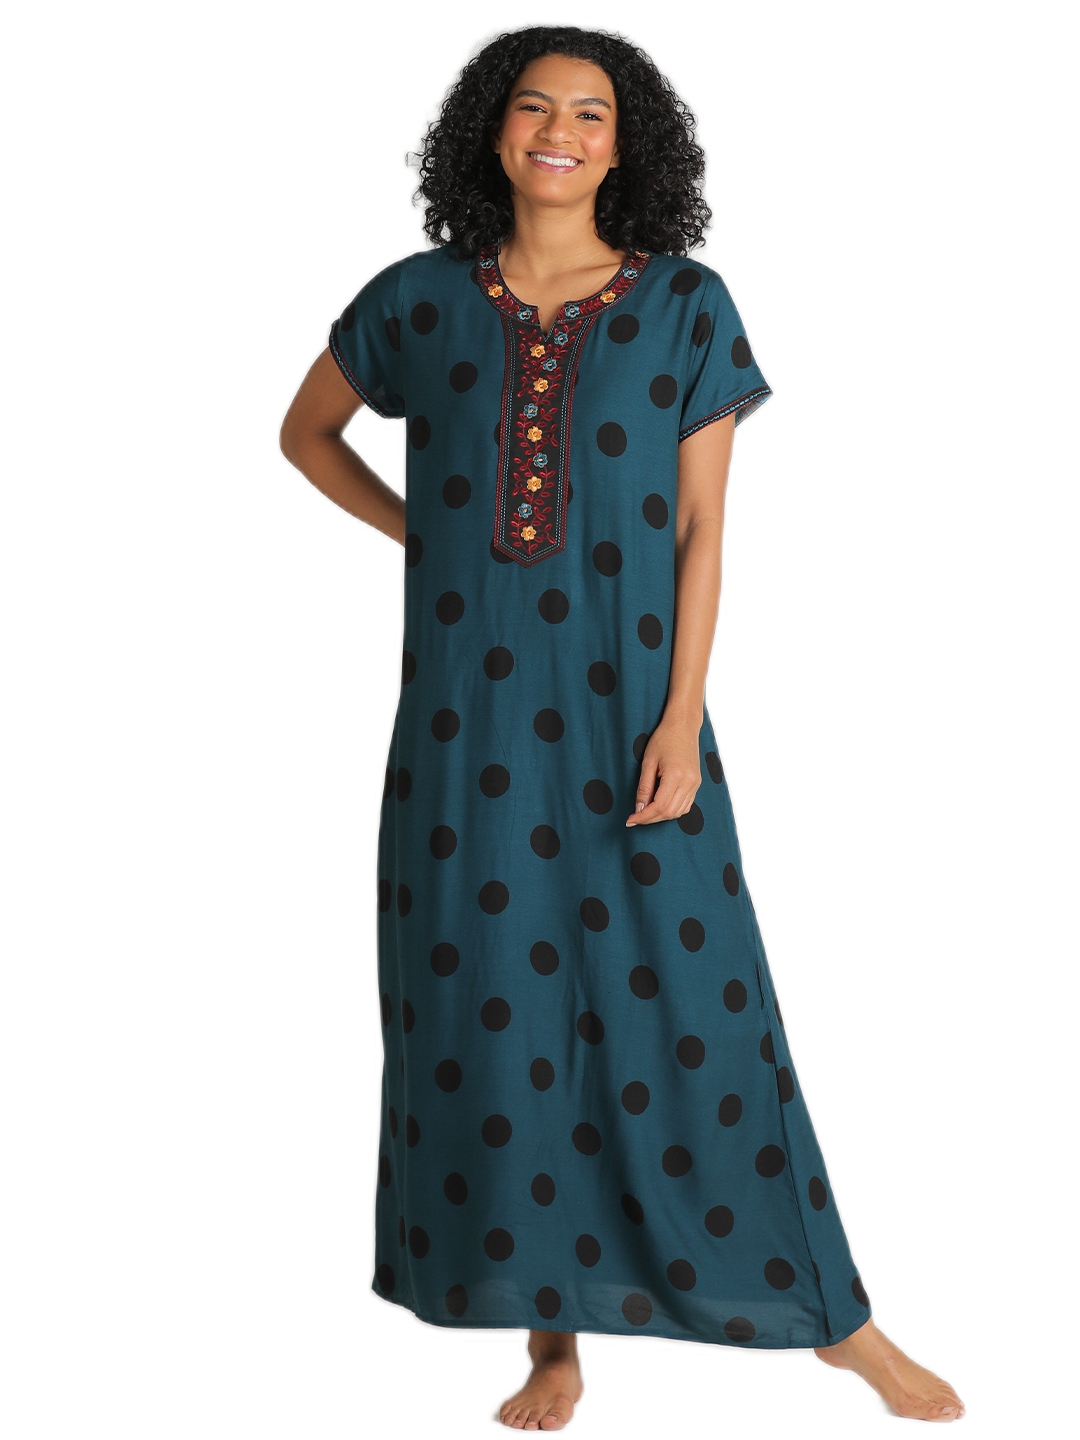 Evolove Loose Fit Nighty Long Maxi Sleepwear Nightgown for Women's or Ladies with Stylish Rayon Printed Super Soft Comfortable Design